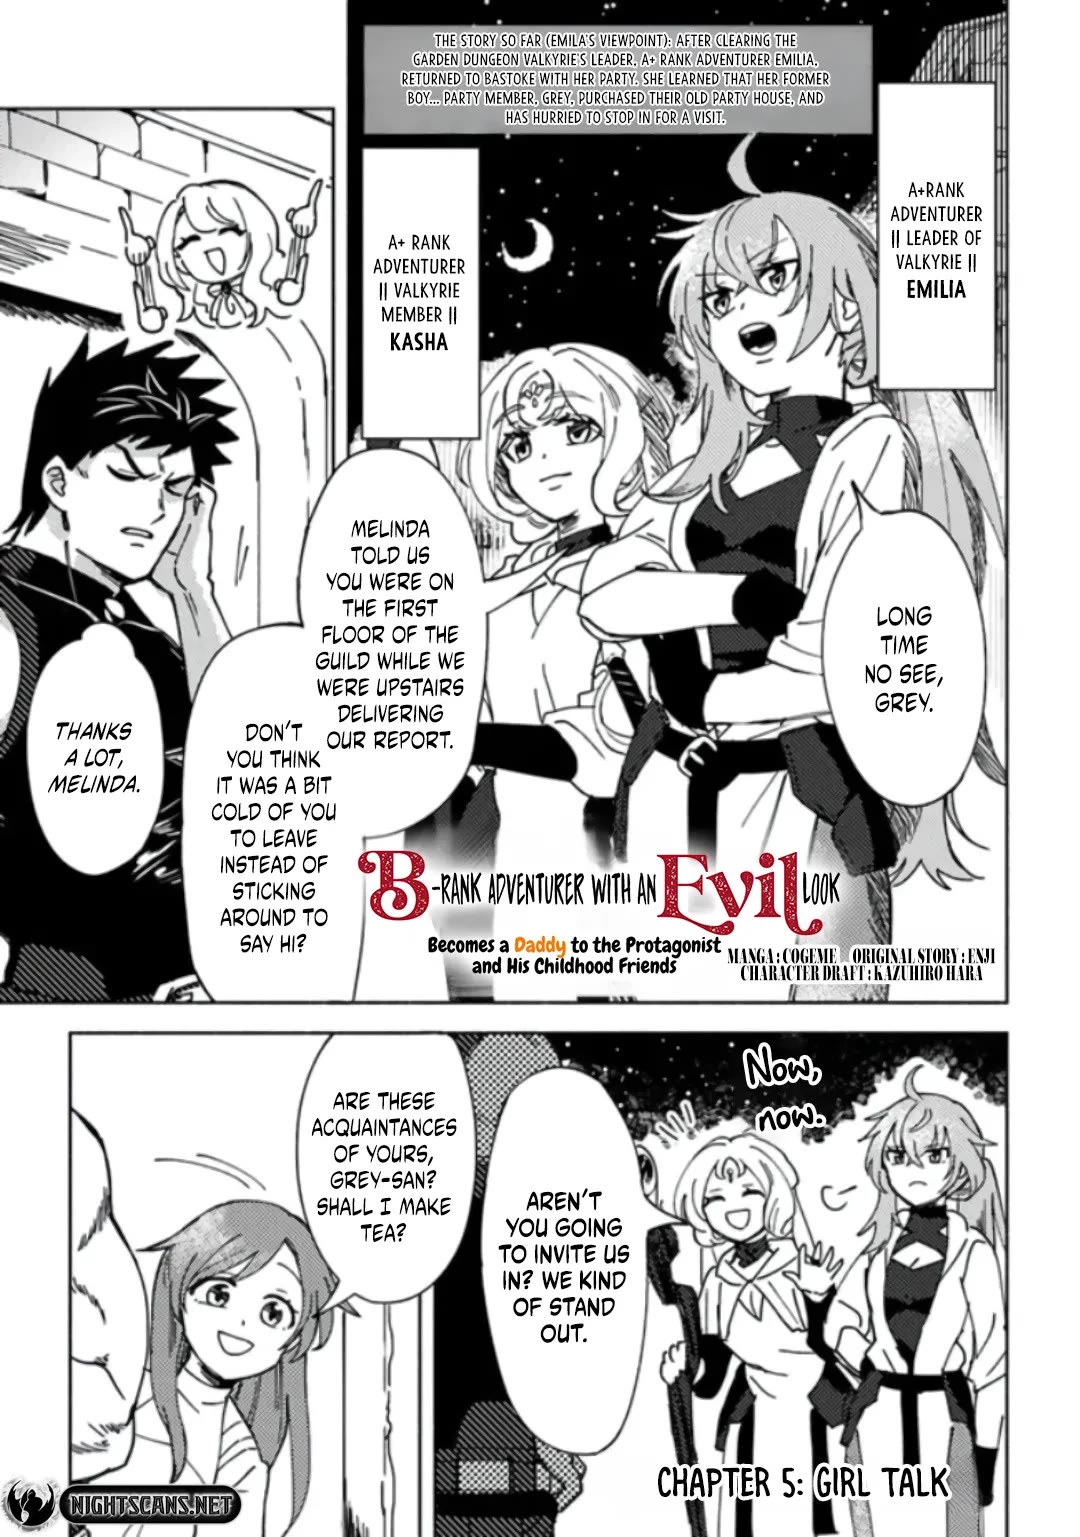 B-Rank Adventurer With a Bad Guy Face Becomes a Father for the Hero and His Childhood Friends - chapter 5 - #2